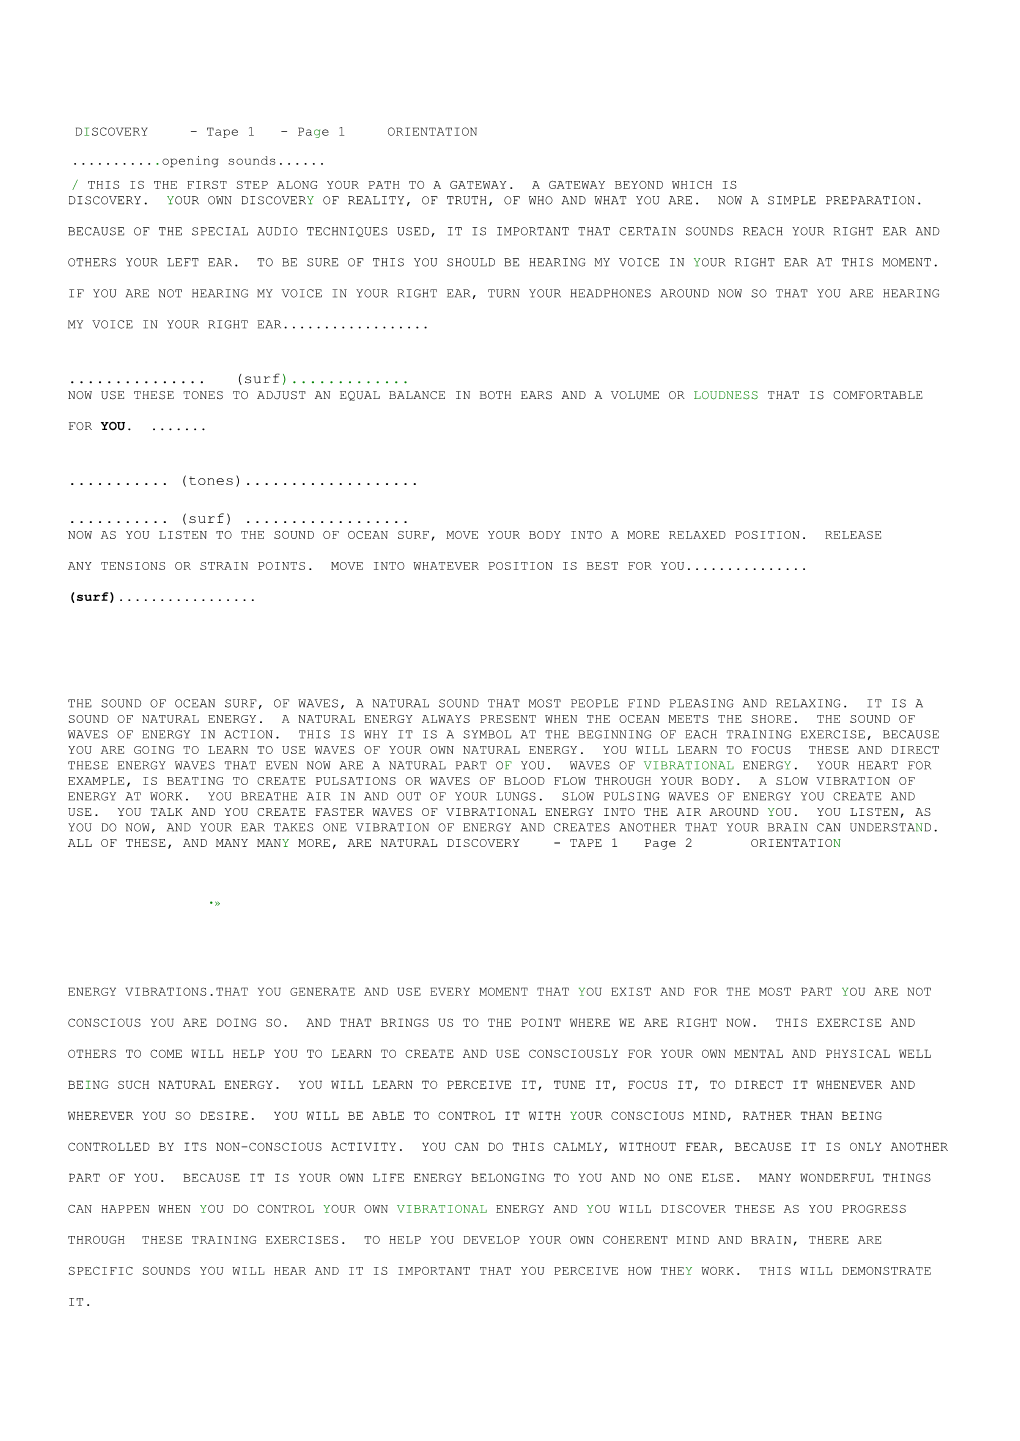 DISCOVERY - Tape 1 - Page 1 ORIENTATION